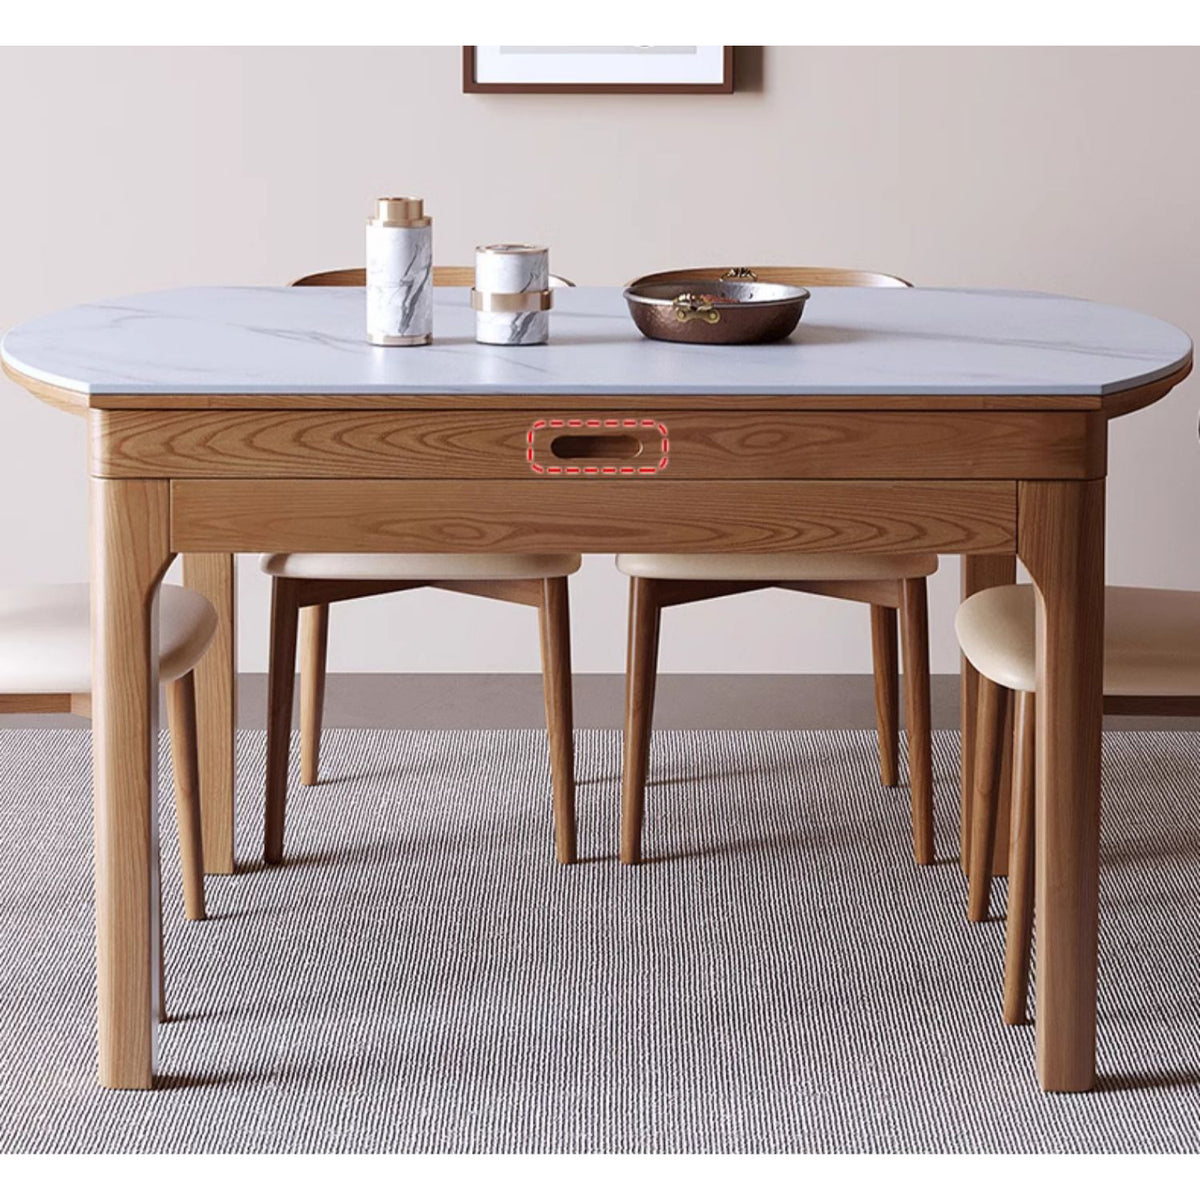 Sleek Brown Frame Table with Natural Sintered Stone & Ash Wood Finish fmbs-007